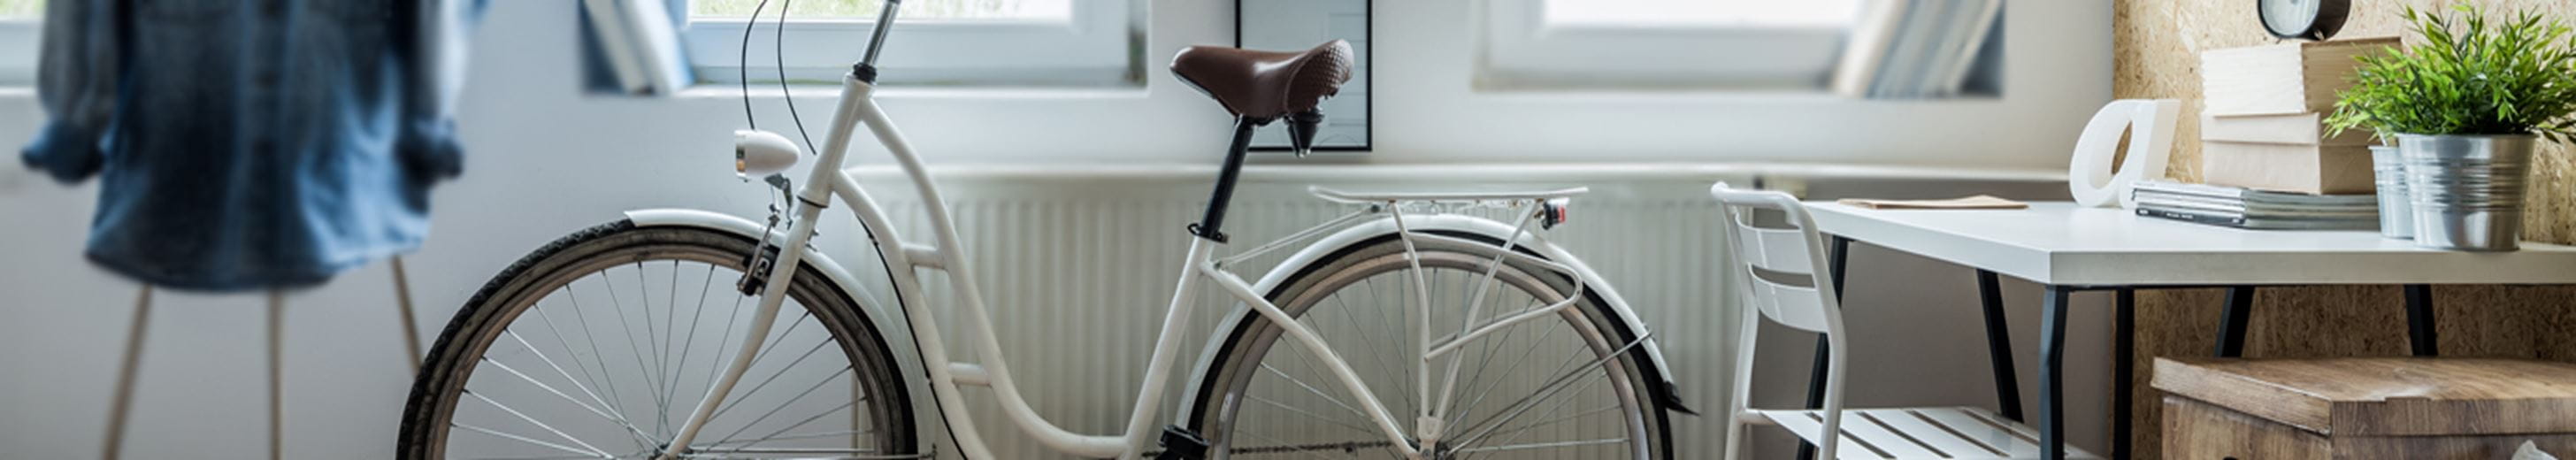 A bicycle next to a radiator